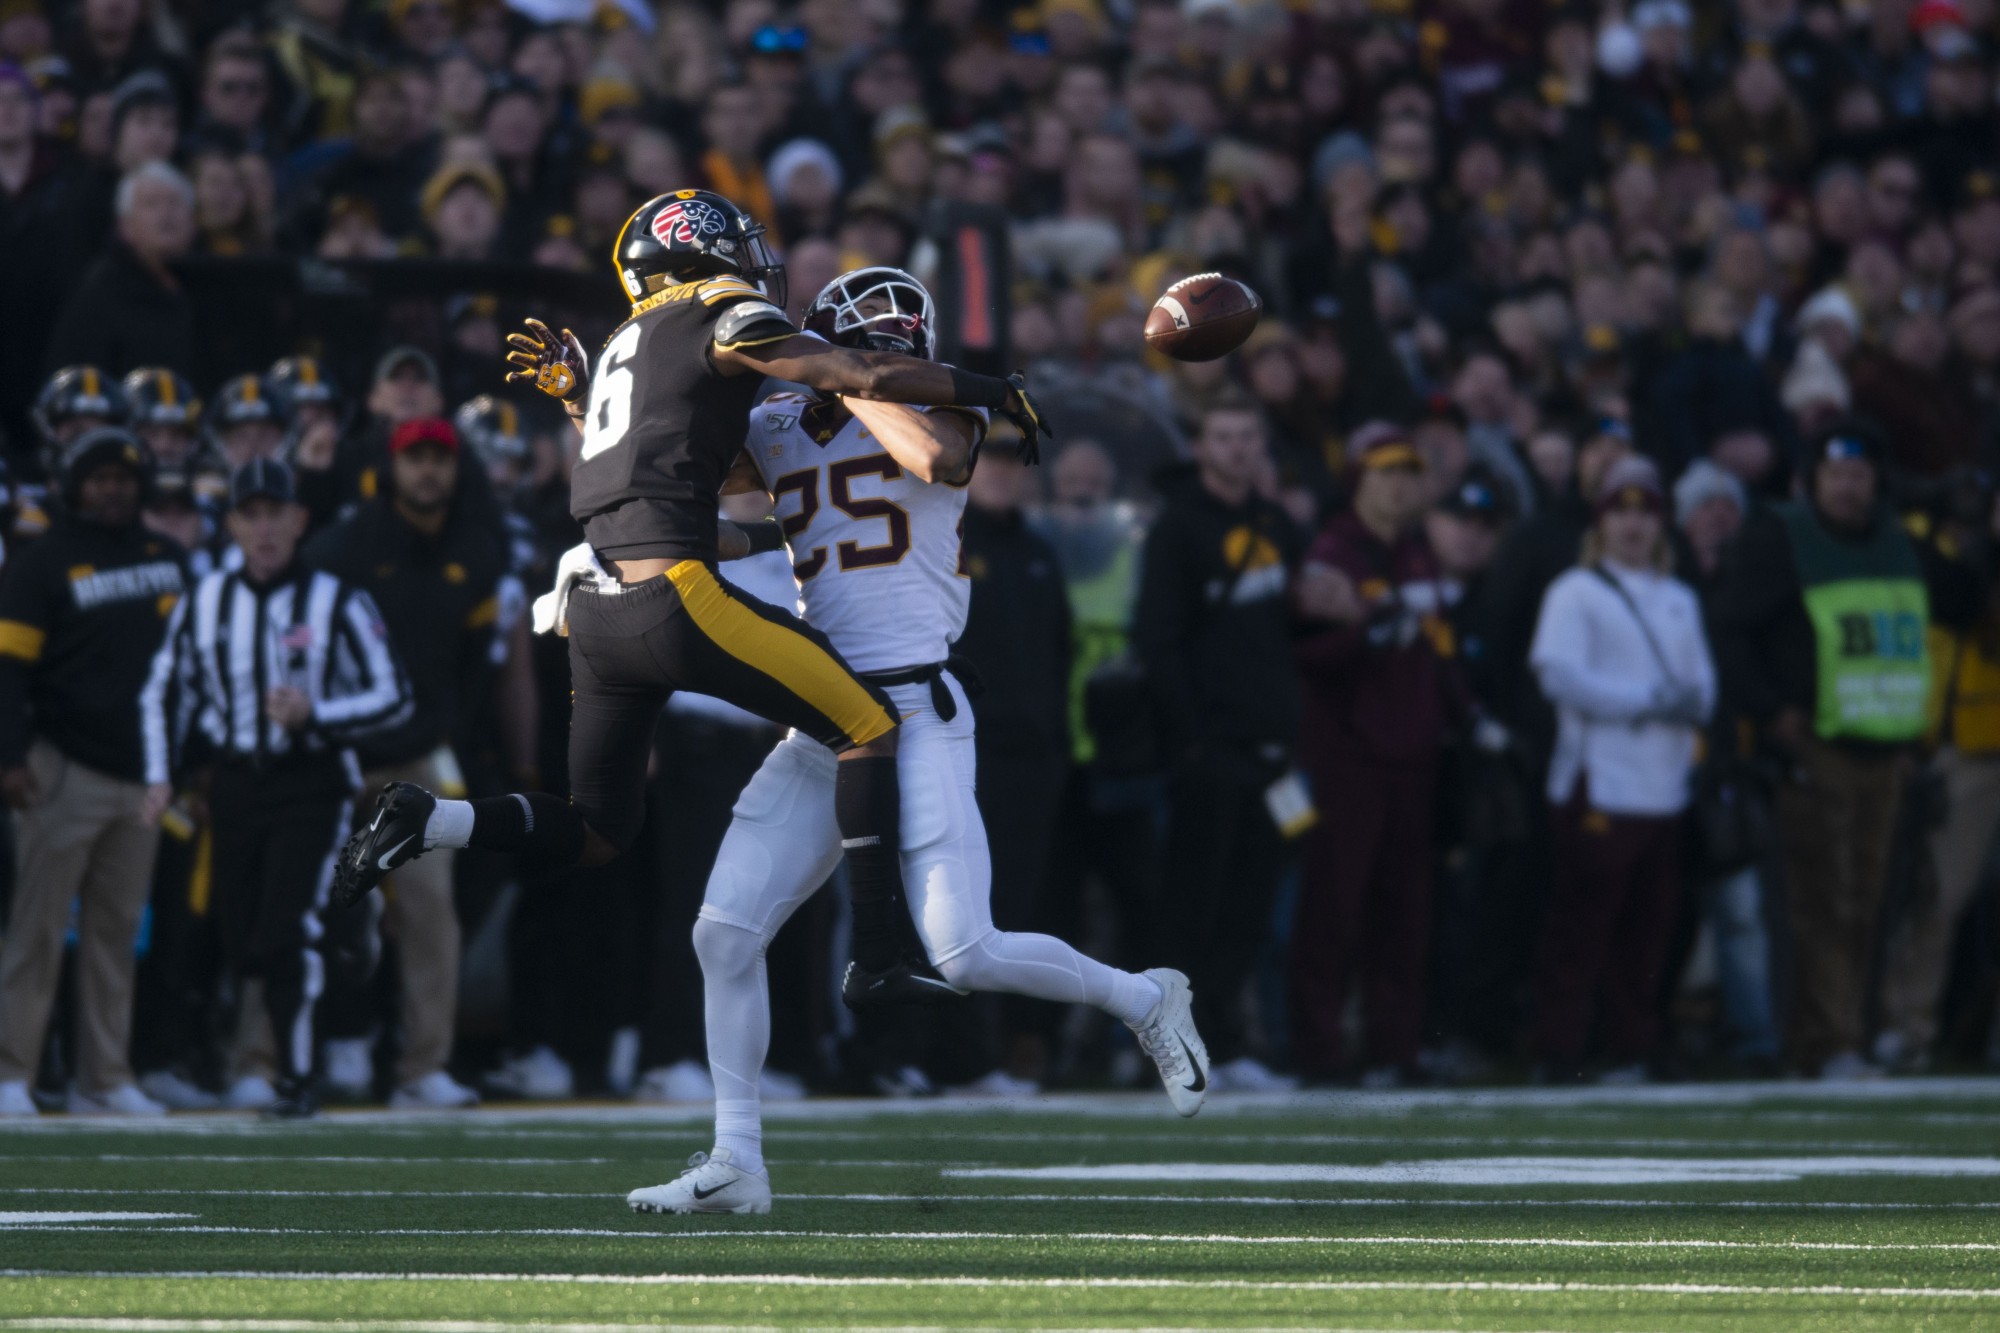 Defensive back Benjamin St-Juste looks to deflect a pass during the first quarter at Kinnick Stadium on Saturday Nov. 16.  Iowa defeated the Gophers 23-19 ending their winning streak and bringing their record to 9-1. 